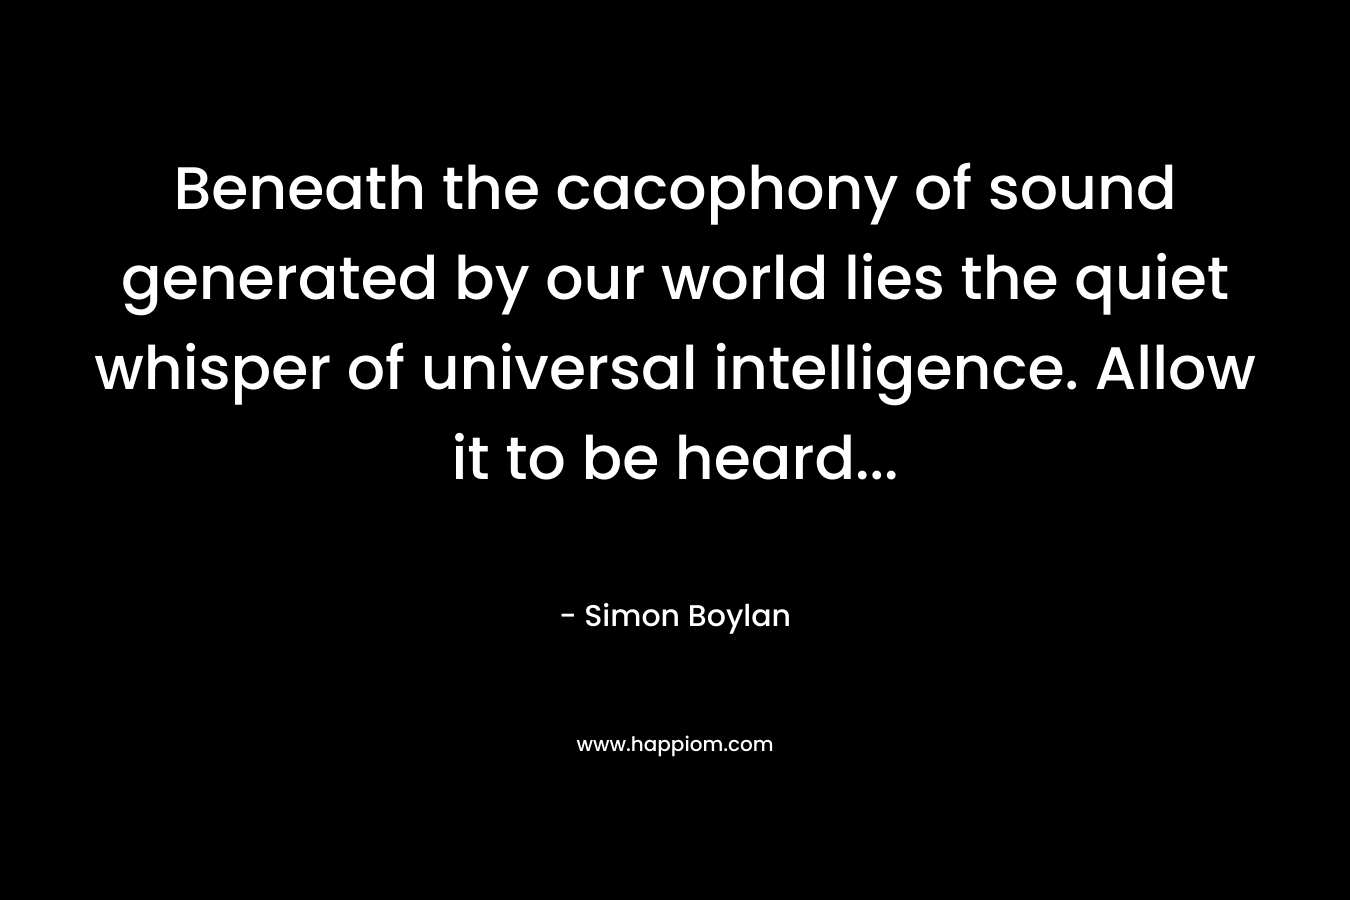 Beneath the cacophony of sound generated by our world lies the quiet whisper of universal intelligence. Allow it to be heard...